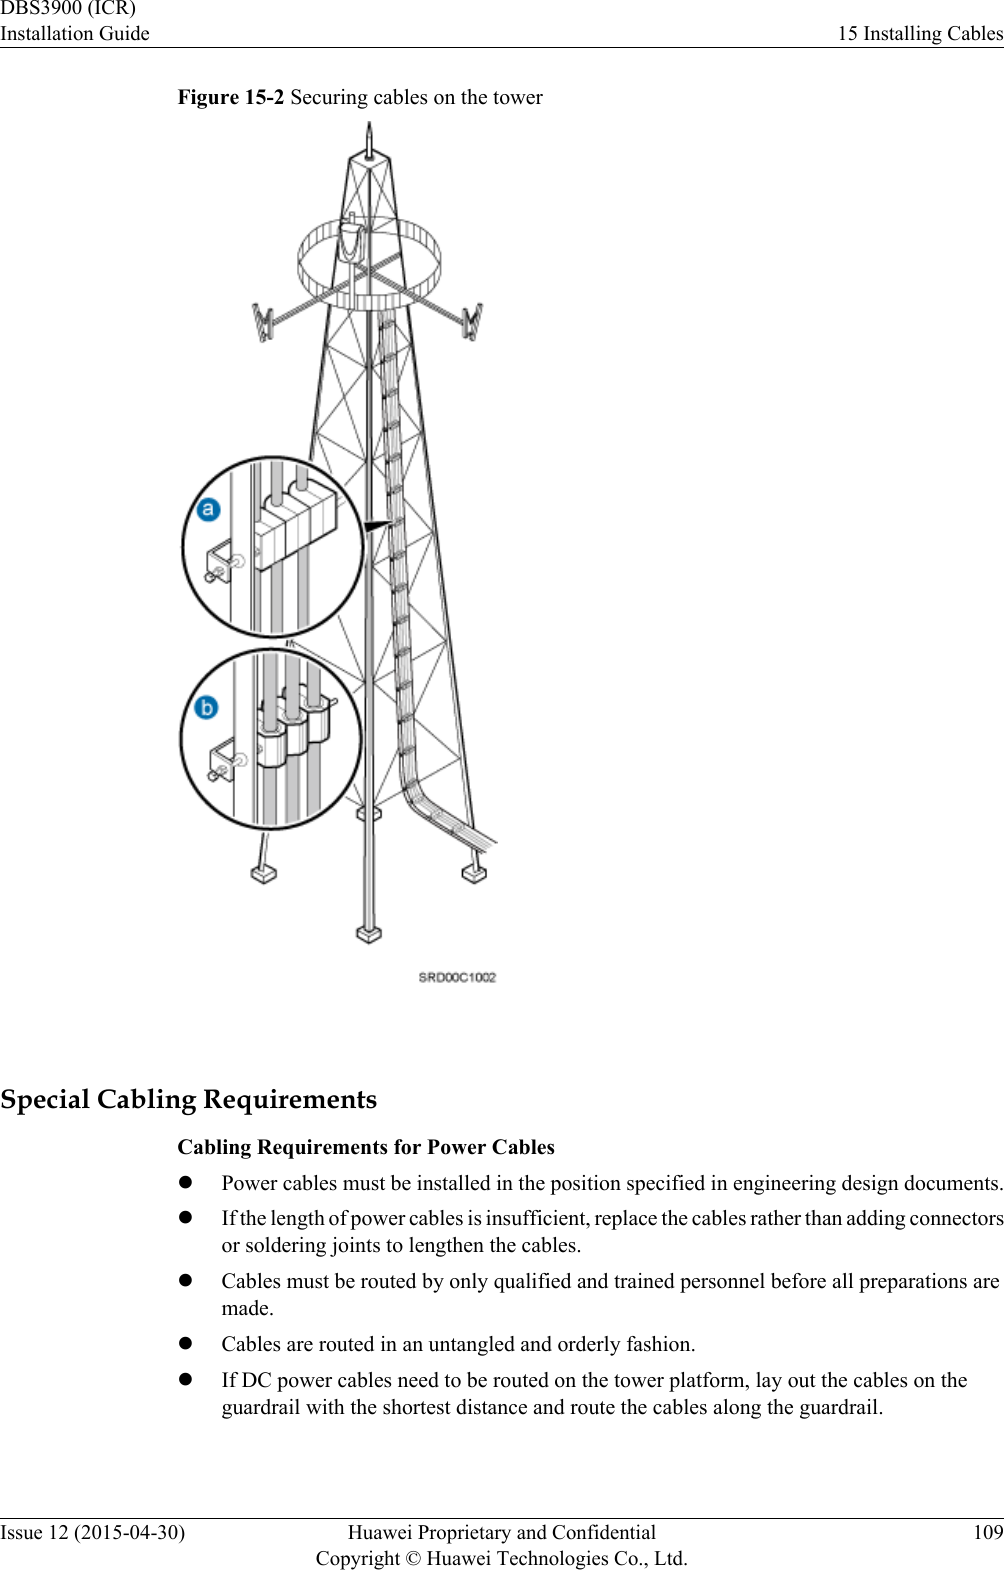 Figure 15-2 Securing cables on the tower Special Cabling RequirementsCabling Requirements for Power CableslPower cables must be installed in the position specified in engineering design documents.lIf the length of power cables is insufficient, replace the cables rather than adding connectorsor soldering joints to lengthen the cables.lCables must be routed by only qualified and trained personnel before all preparations aremade.lCables are routed in an untangled and orderly fashion.lIf DC power cables need to be routed on the tower platform, lay out the cables on theguardrail with the shortest distance and route the cables along the guardrail.DBS3900 (ICR)Installation Guide 15 Installing CablesIssue 12 (2015-04-30) Huawei Proprietary and ConfidentialCopyright © Huawei Technologies Co., Ltd.109